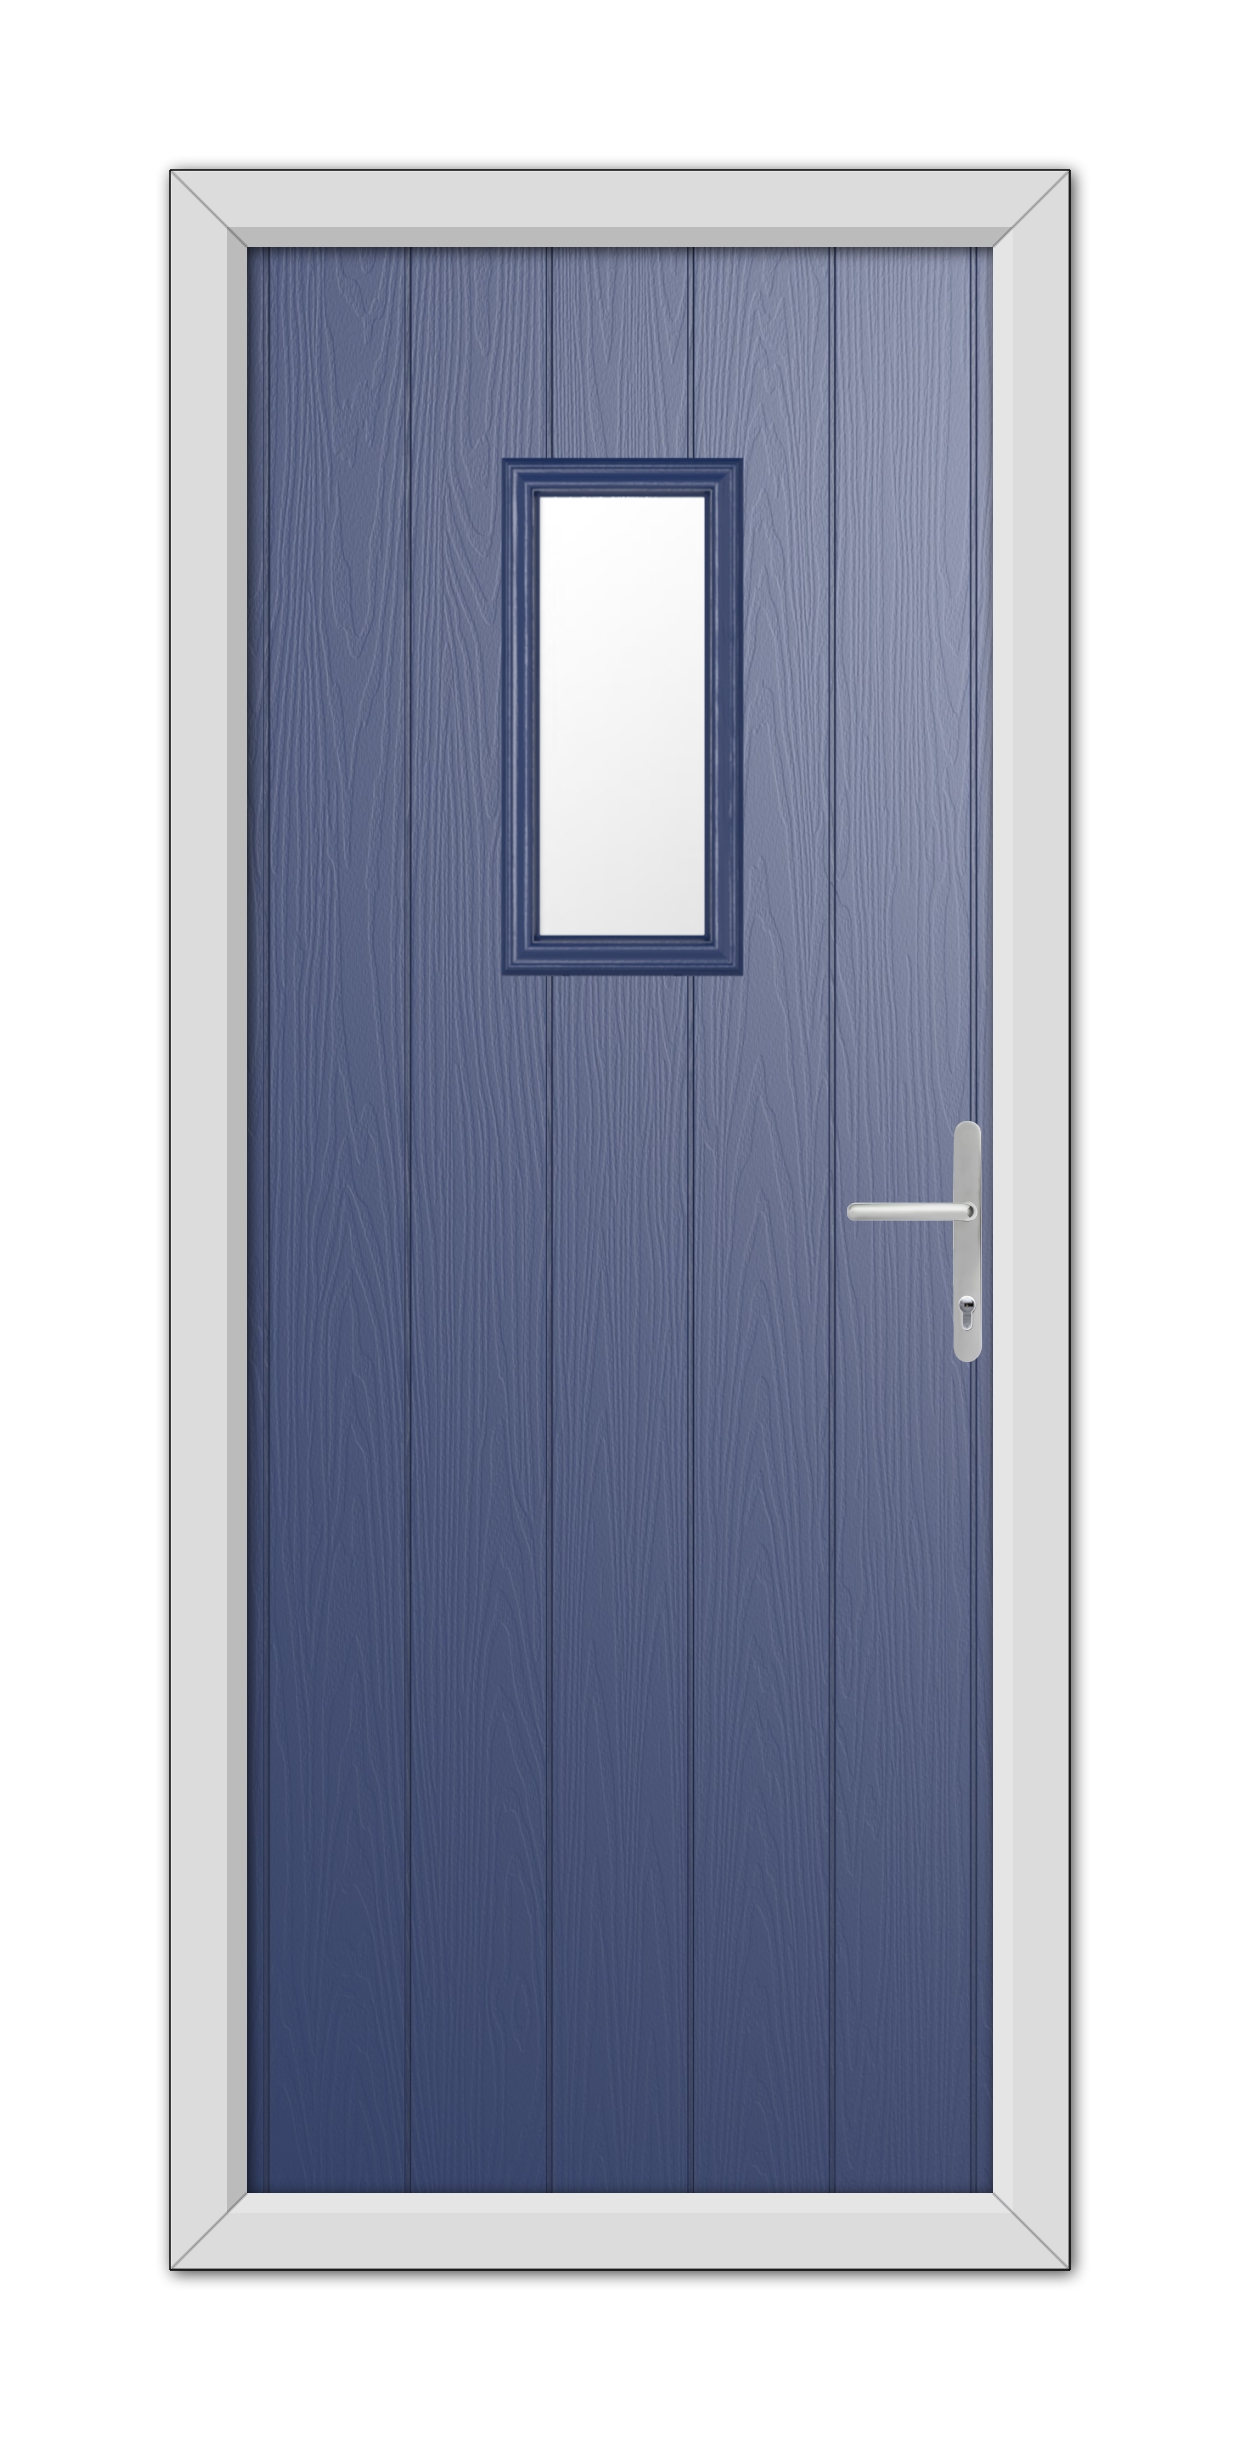 A Blue Somerset Composite Door 48mm Timber Core with a small square window and a silver handle, framed by a white door frame.